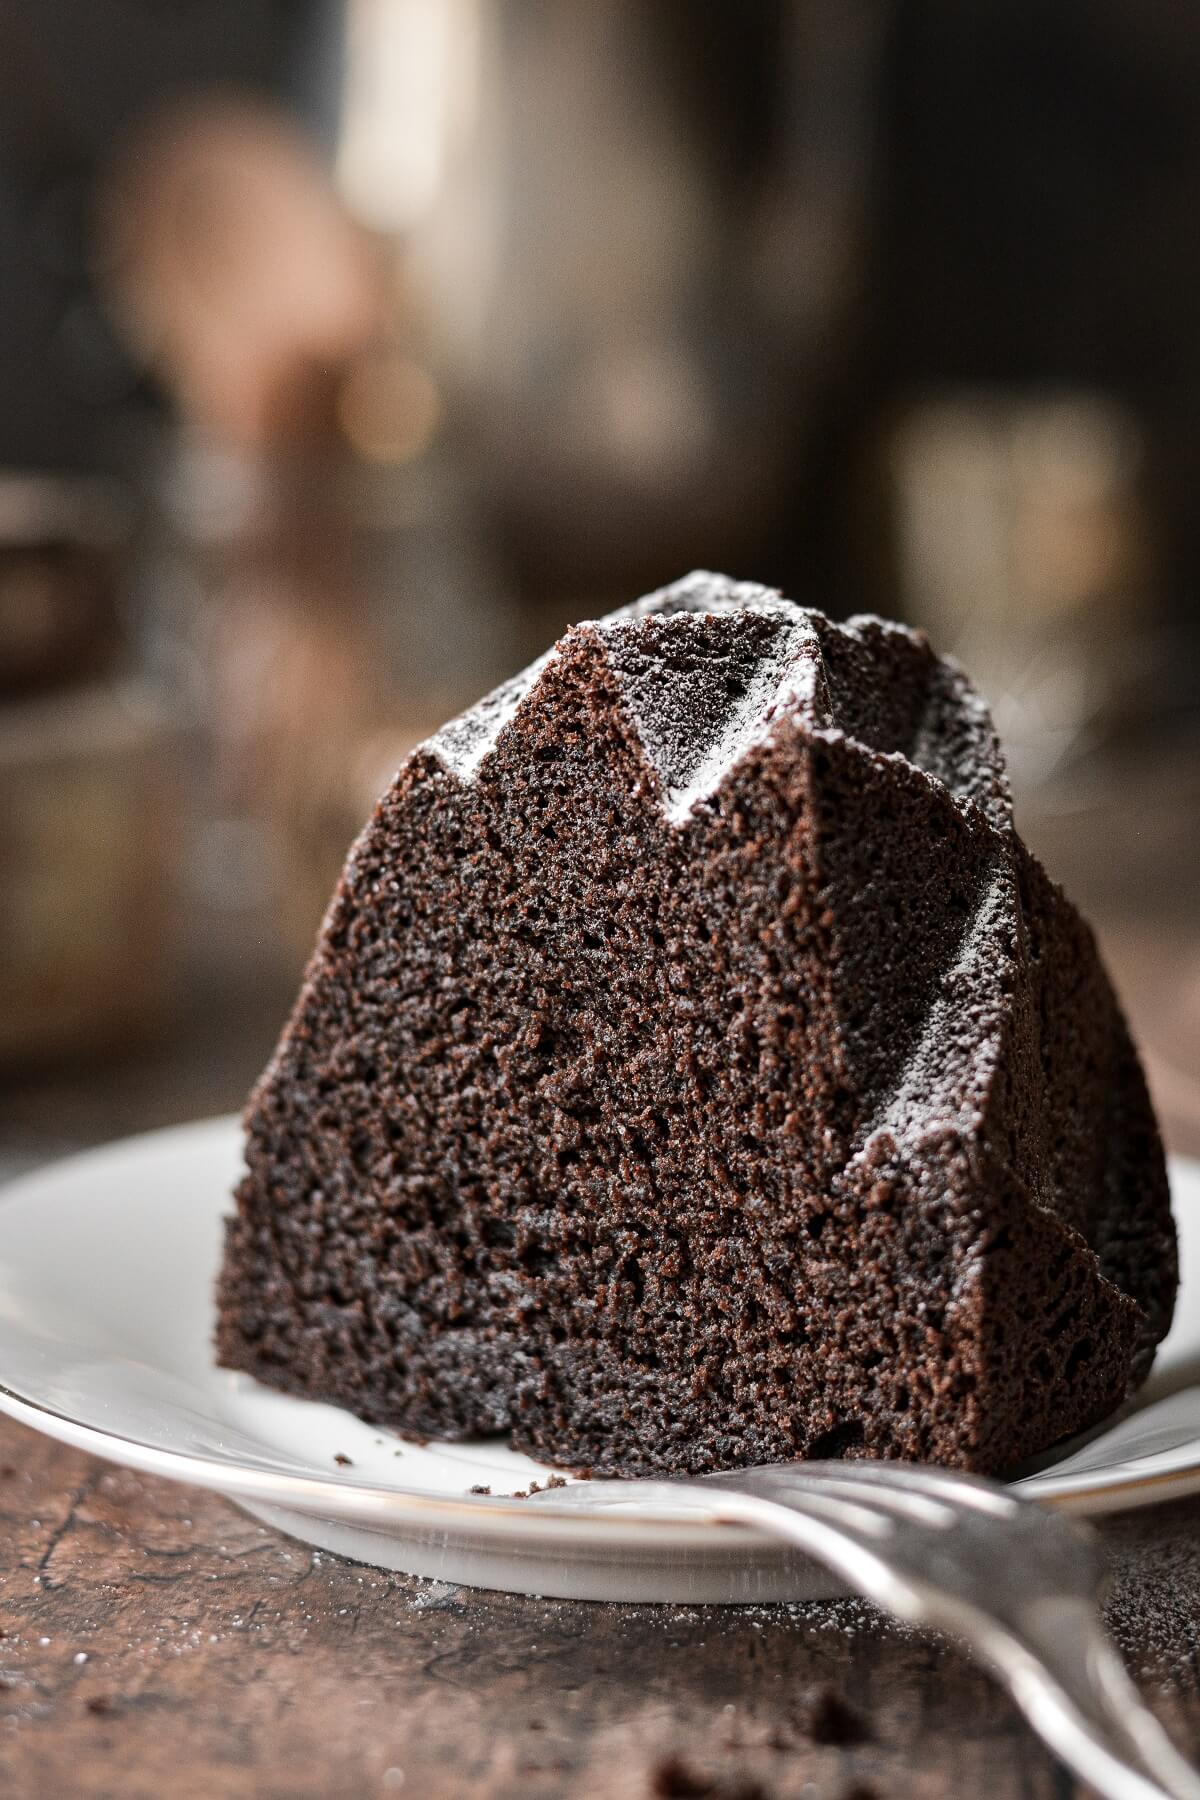 A piece of chocolate bundt cake dusted with powdered sugar.